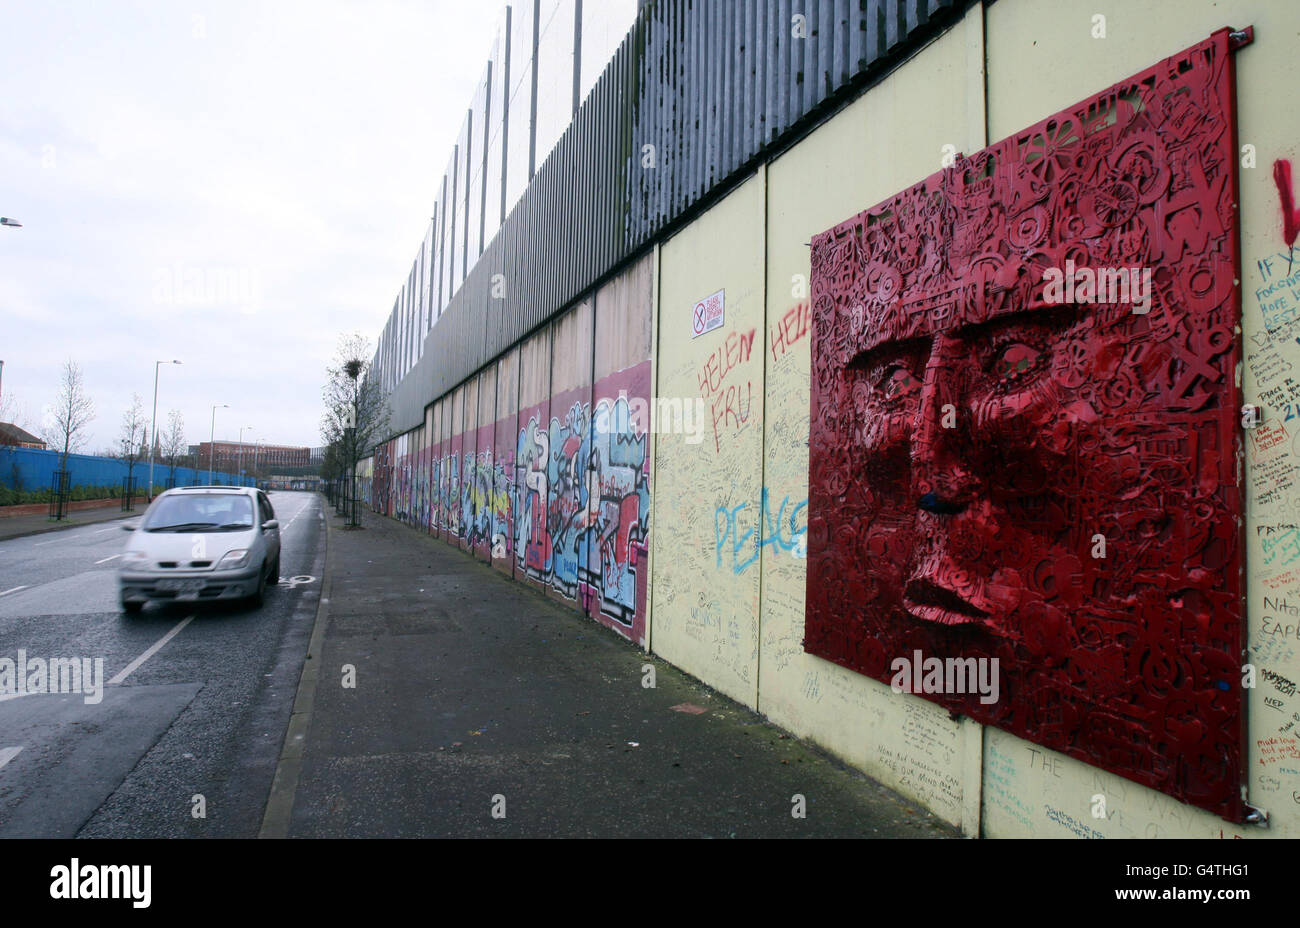 The largest peace wall in Belfast, at Cupar Way, which separates the Catholic Falls area and the Protestant Shankill area of the city. Stock Photo